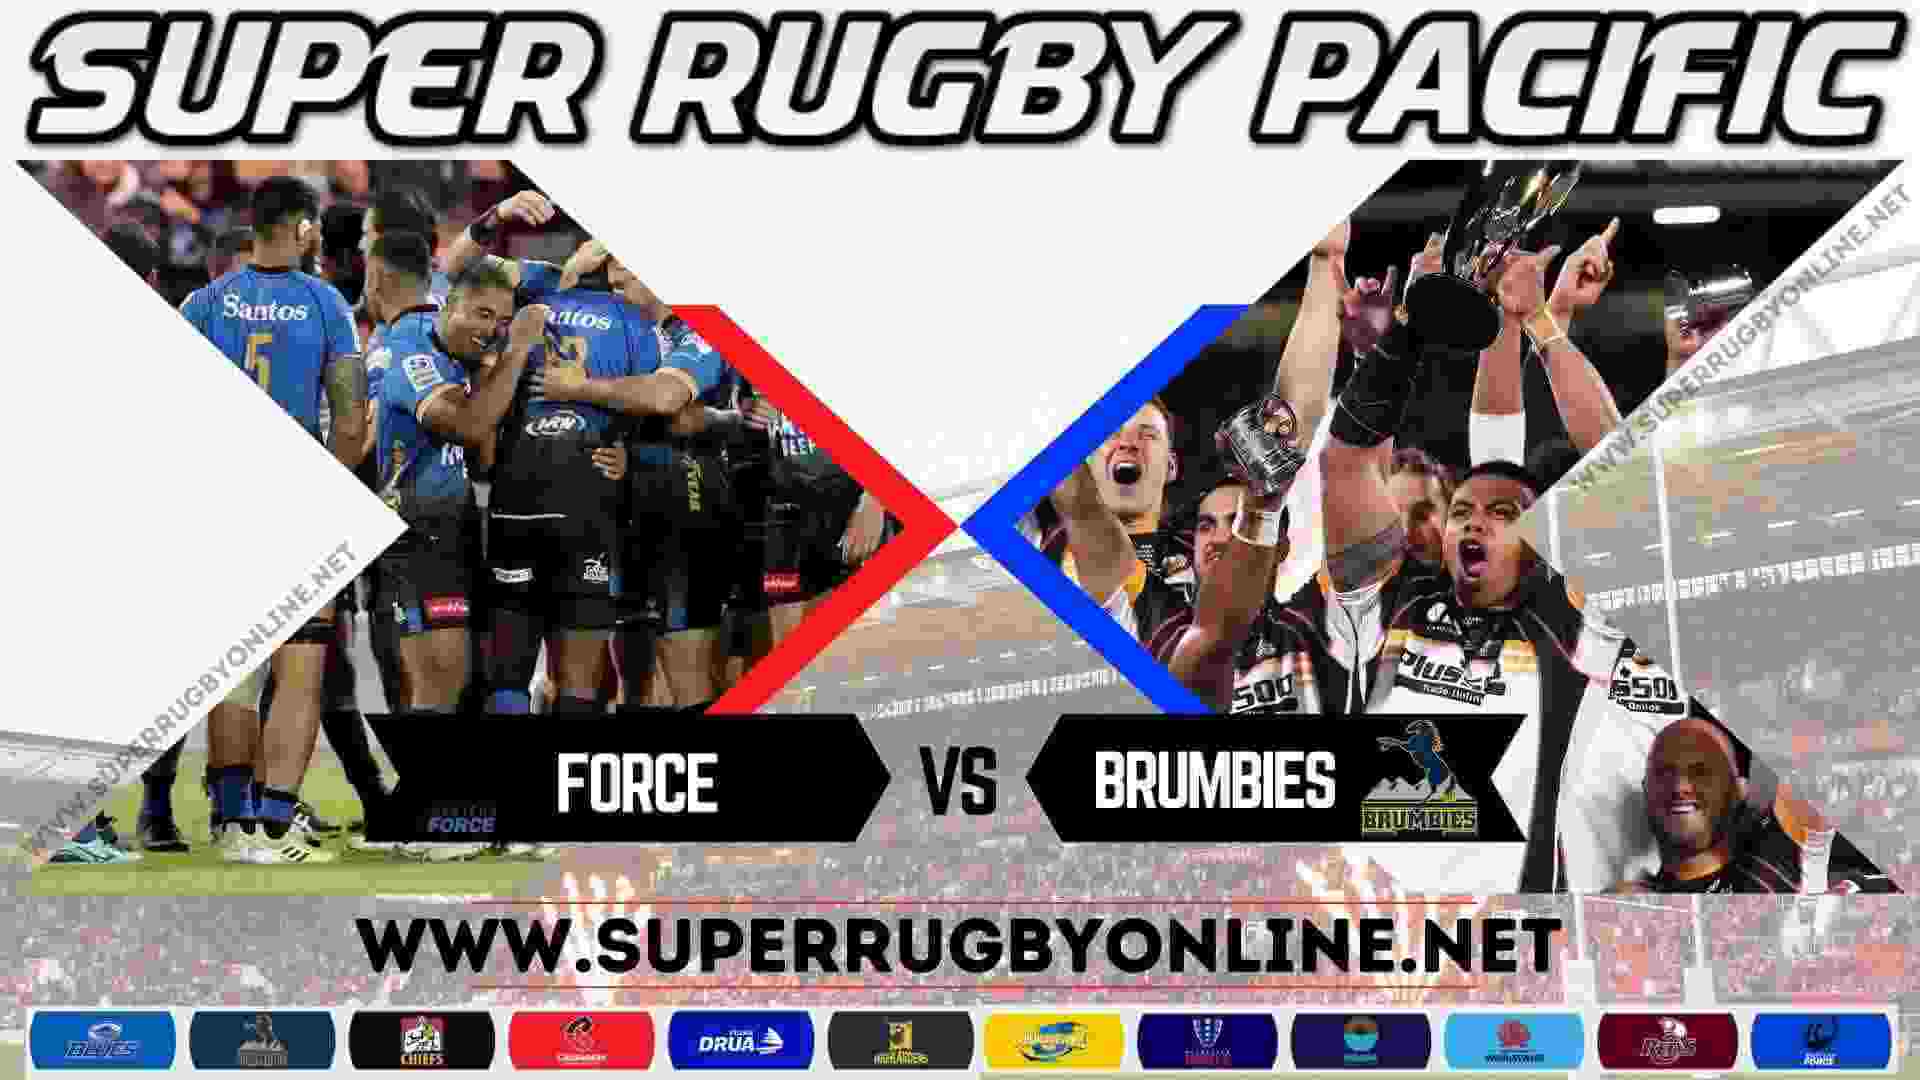 Brumbies Vs Force Rugby Live Stream